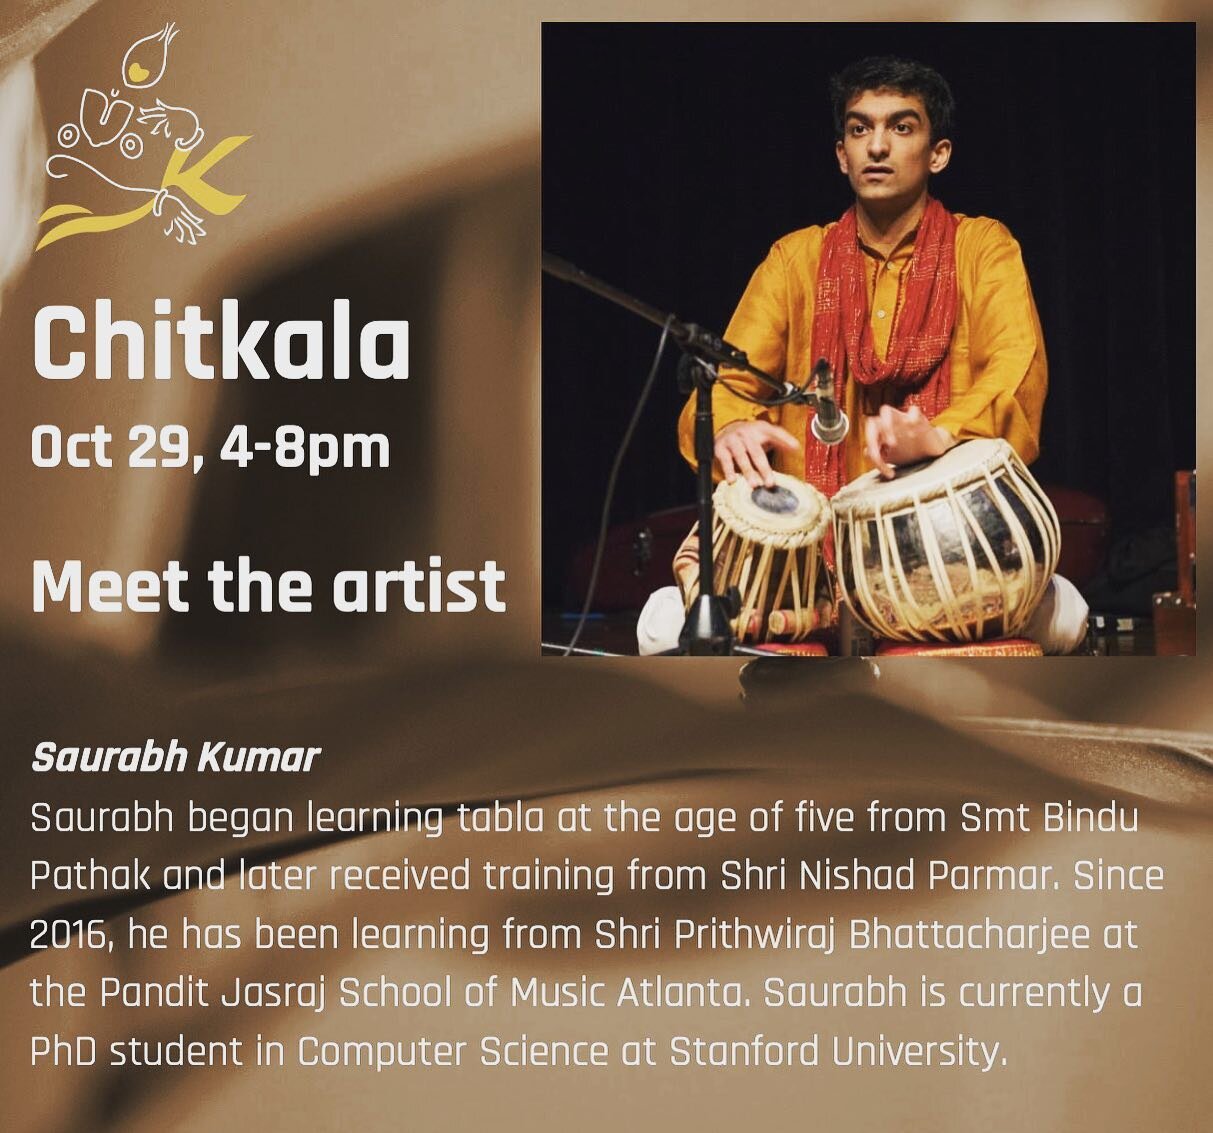 So excited to watch Saurabh play at this weekends concert. Chitkala- Oct 29th from 4-8pm in Danville. We are a full house folks!! If you want to attend, let me know and I&rsquo;ll ping you if space opens up!! 🙏